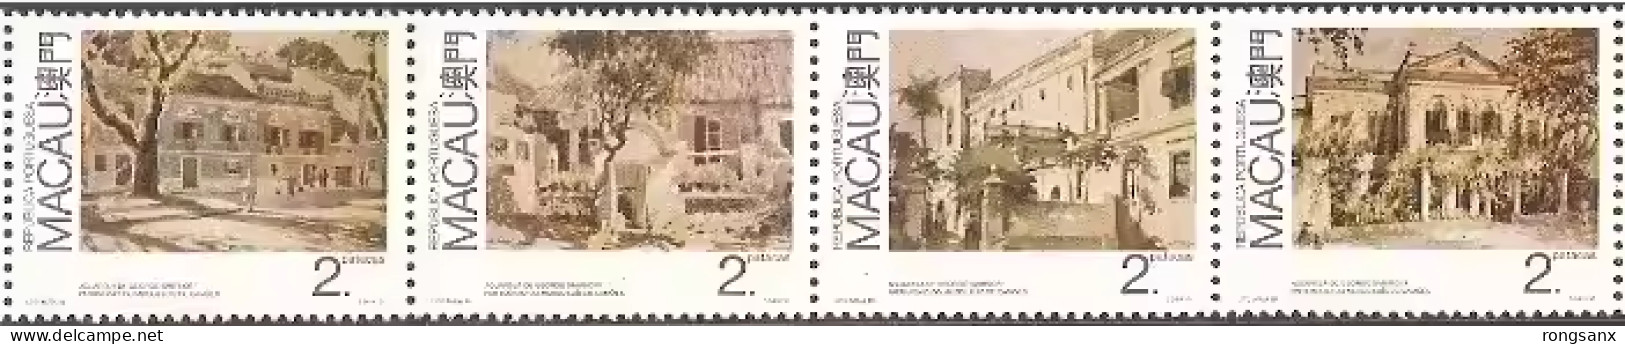 1989  MACAO COLORFUL Paintings 4v STAMP - Nuovi